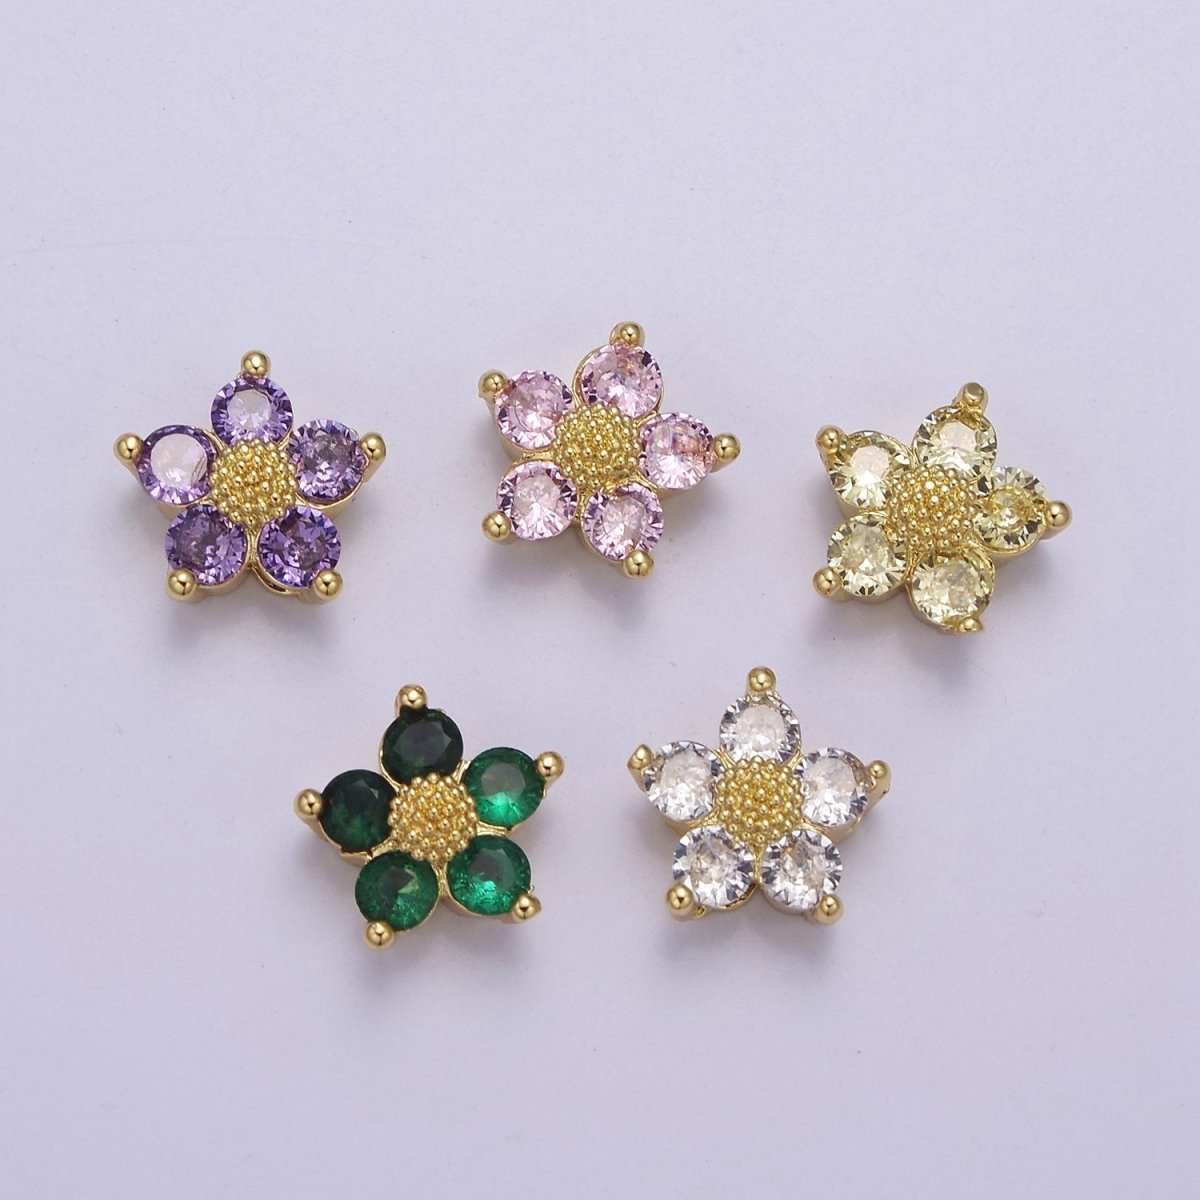 Dainty CZ Flower Spacer Bead, Gold Floral Spacer Beads Pink Clear Purple Green CZ Spacer Beads, Small Daisy Spacers for Bracelet Necklace B-088 B-136 B-171 B-176 B-177 - DLUXCA